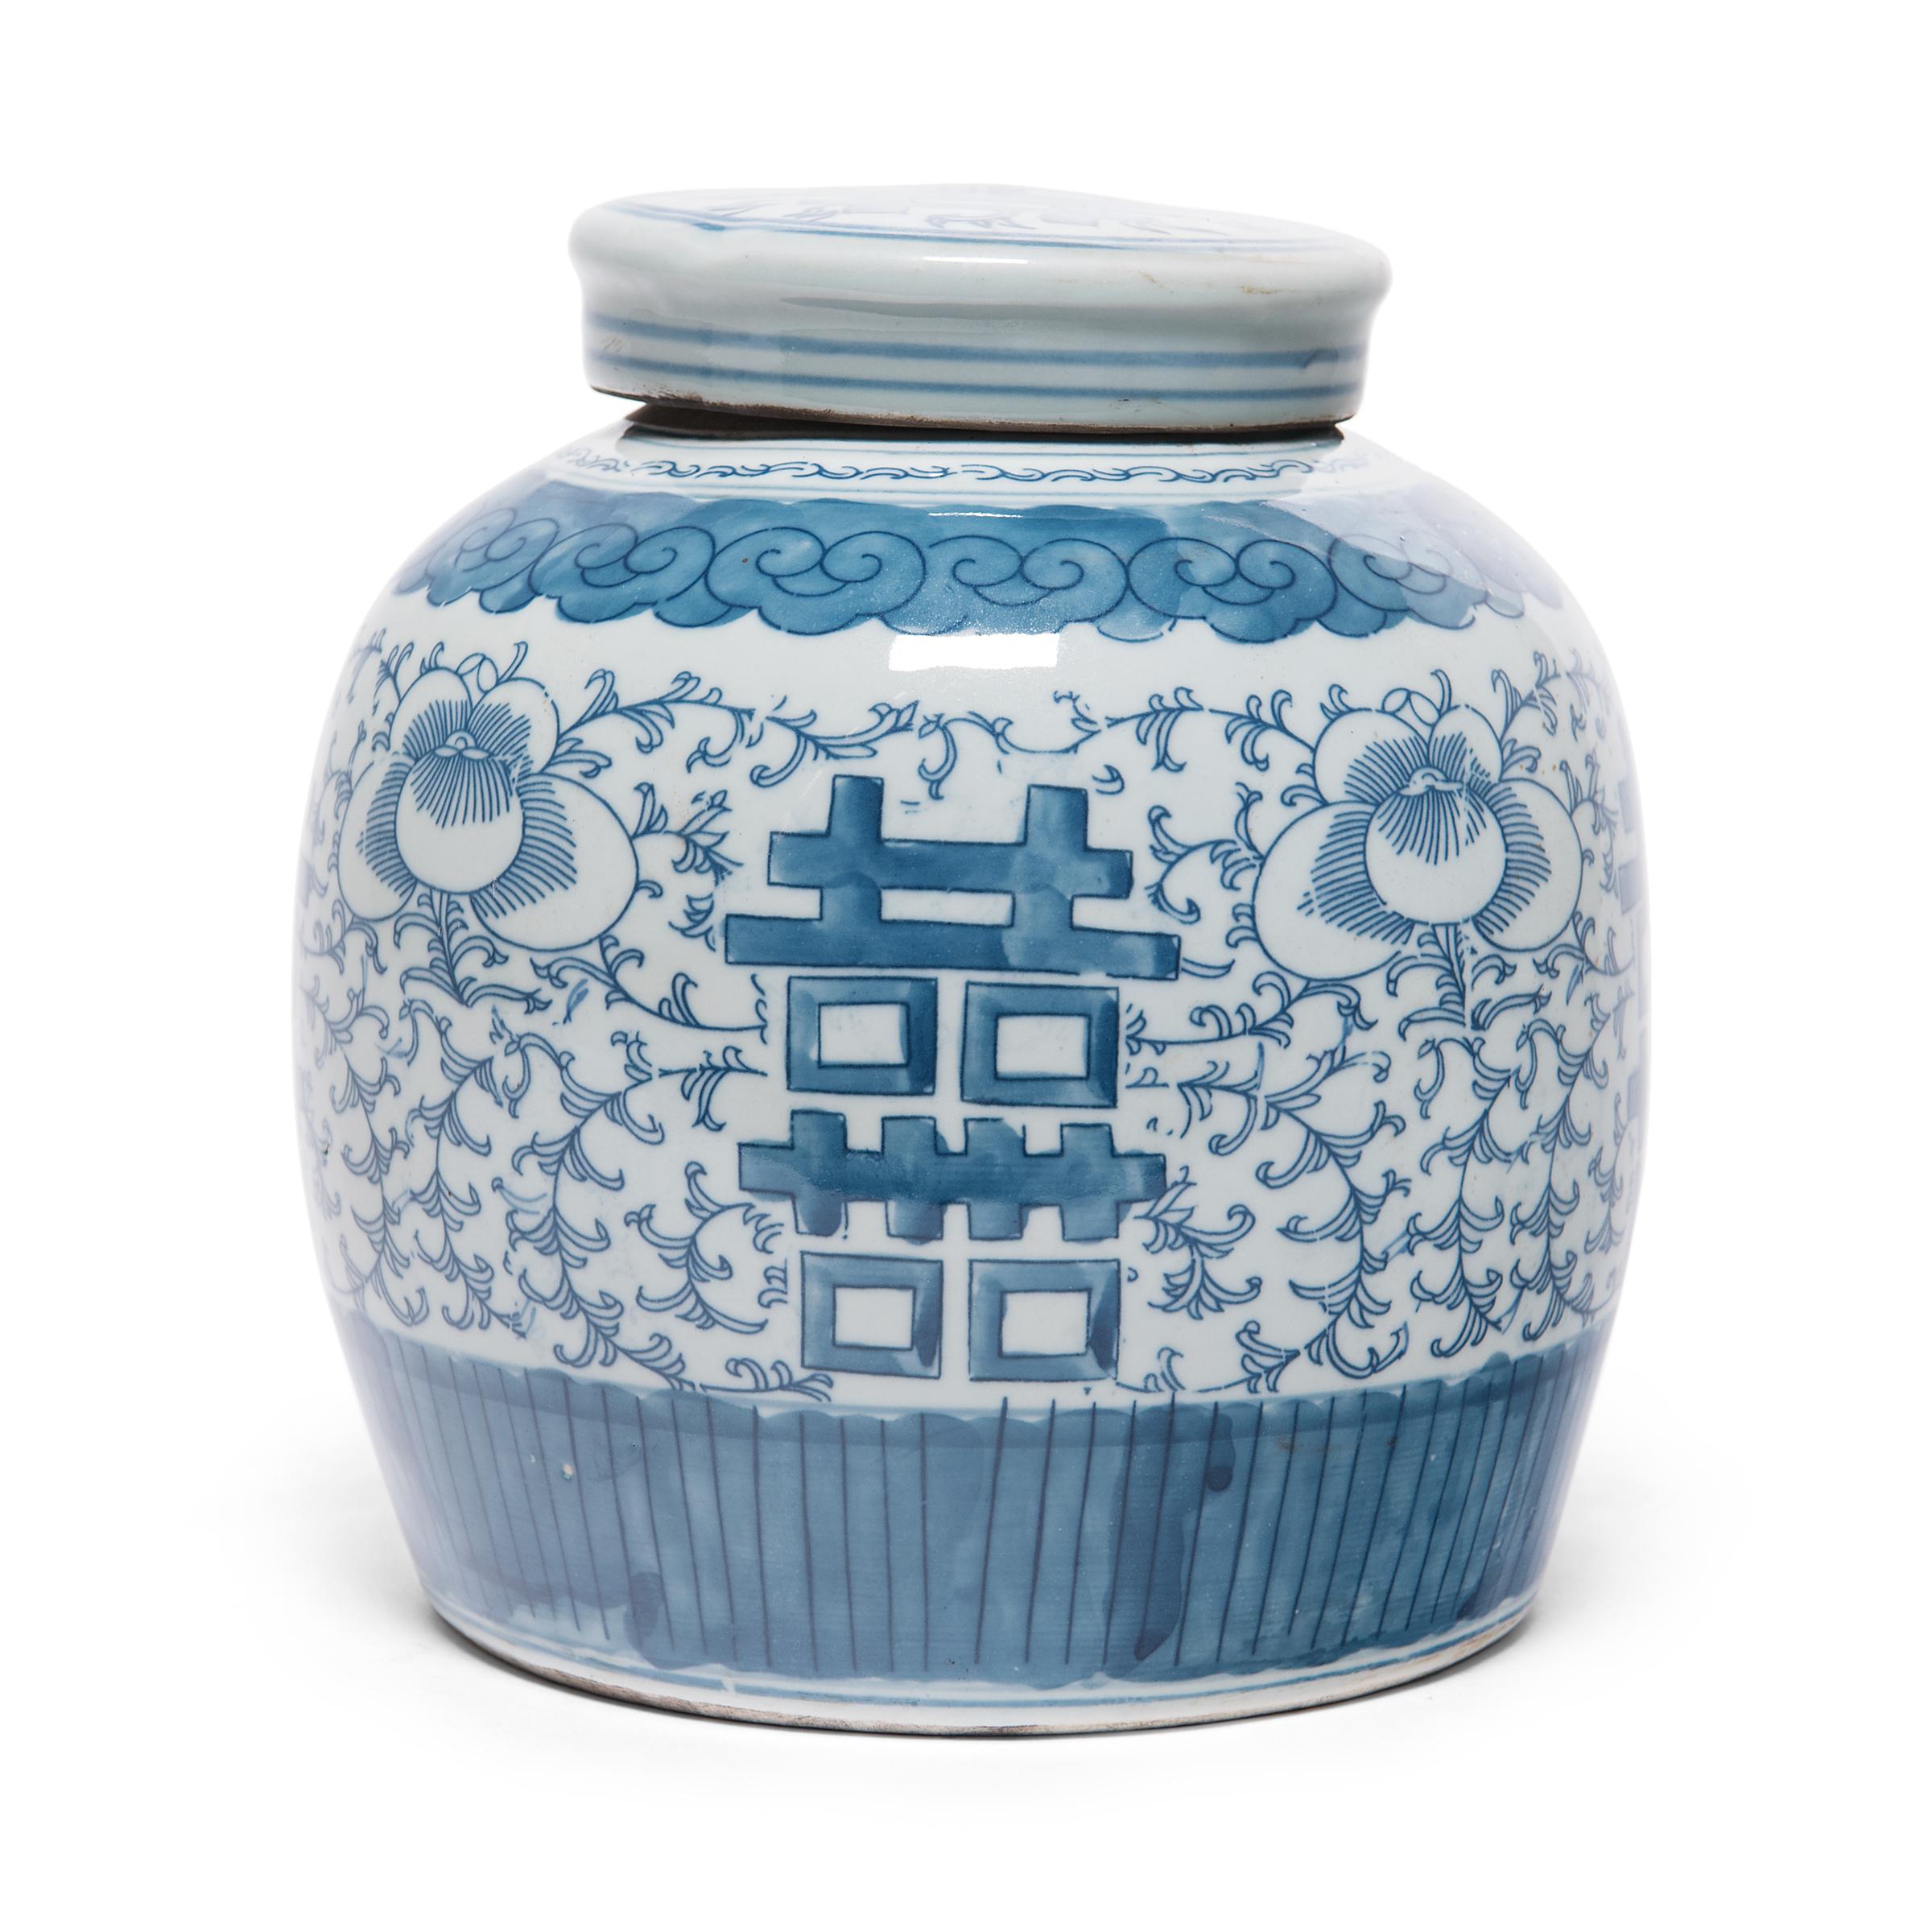 Glazed Chinese Blue and White Double Happiness Jar